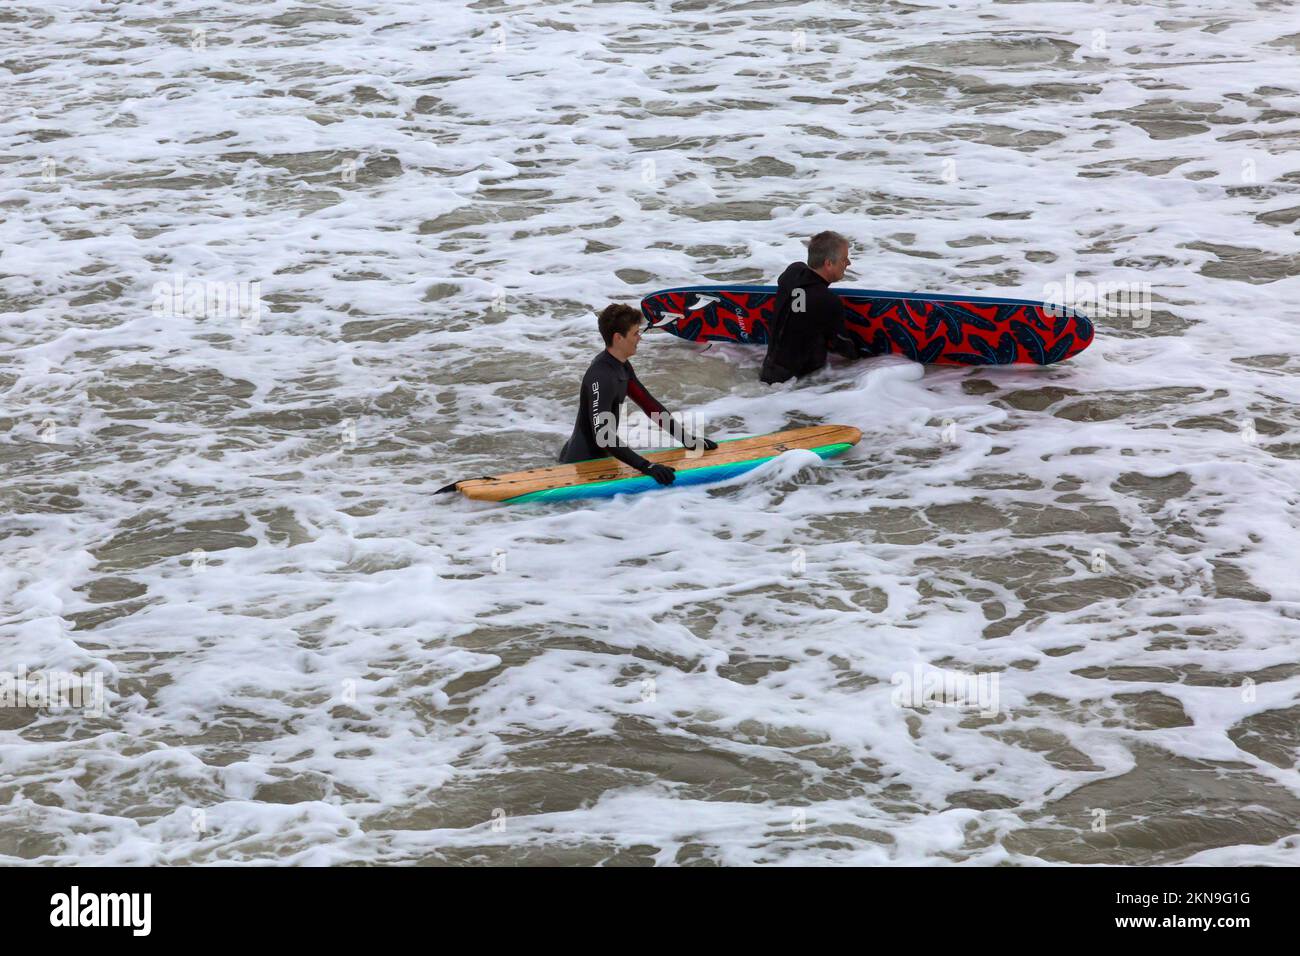 Bournemouth, Dorset UK. 27th November 2022. UK weather: high tides and big waves as surfers head to Bournemouth beach to make the most of the conditions surfing in the sea. Credit: Carolyn Jenkins/Alamy Live News Stock Photo